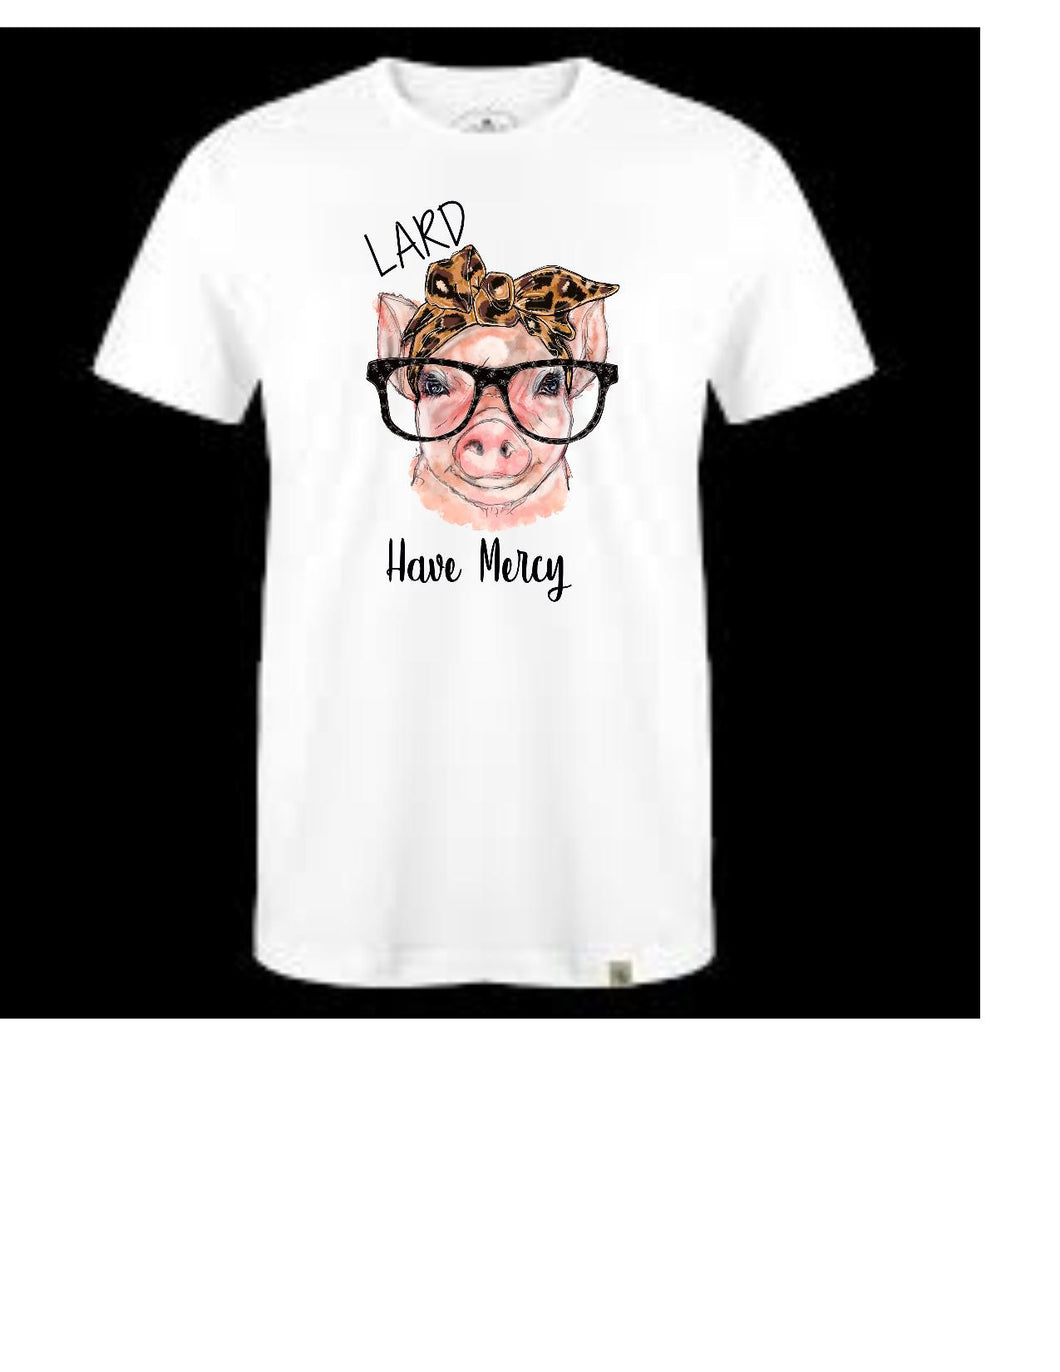 Lard have Mercy funny shirt with pig with glasses t-shirt